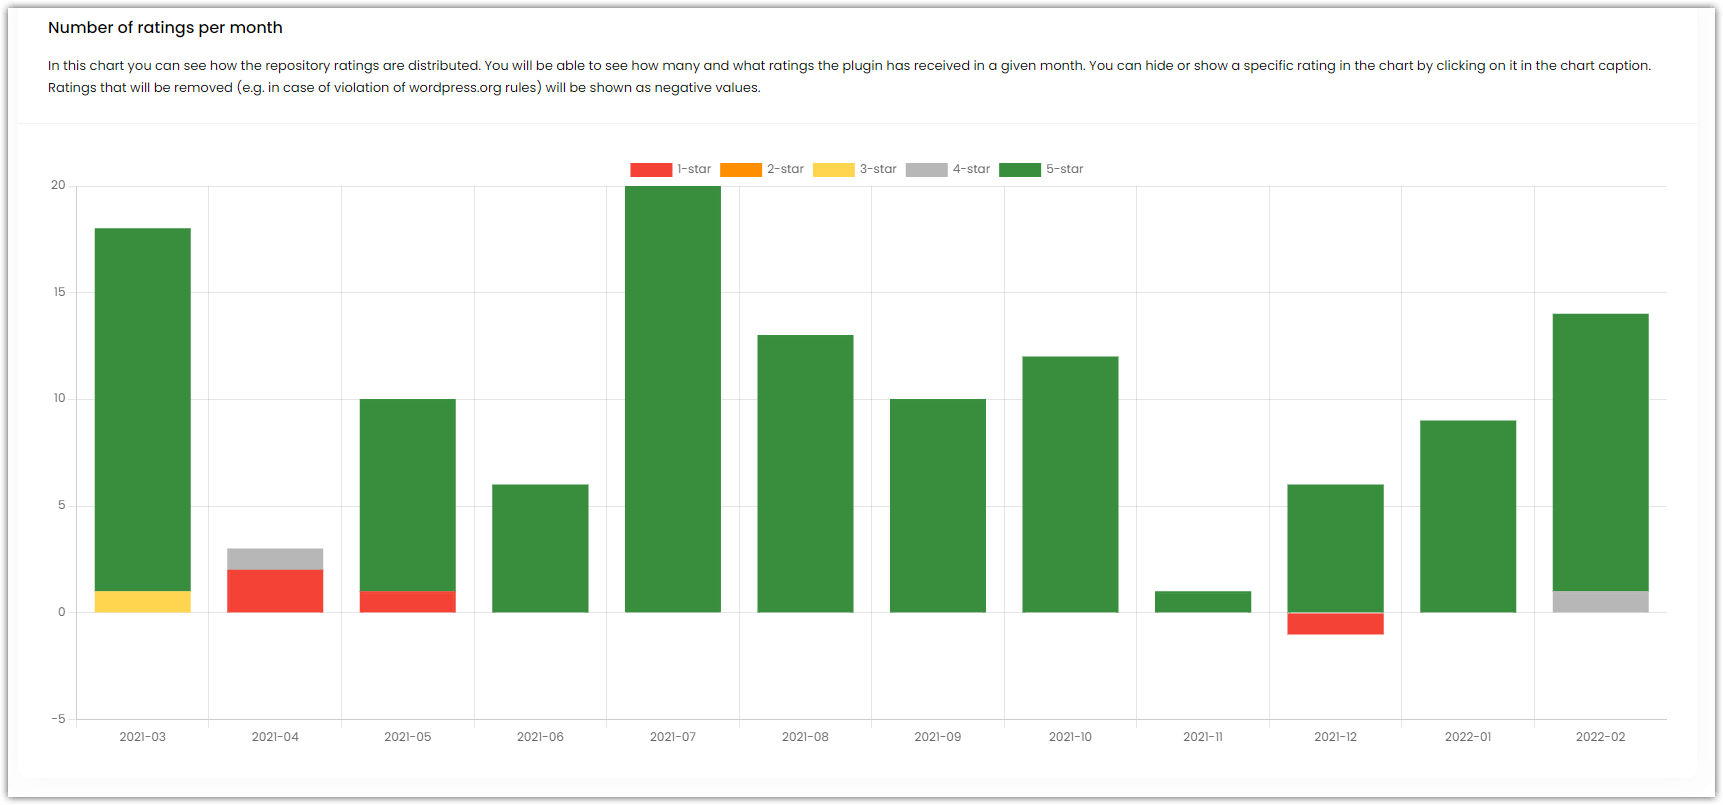 Number of ratings per month - Classic Editor